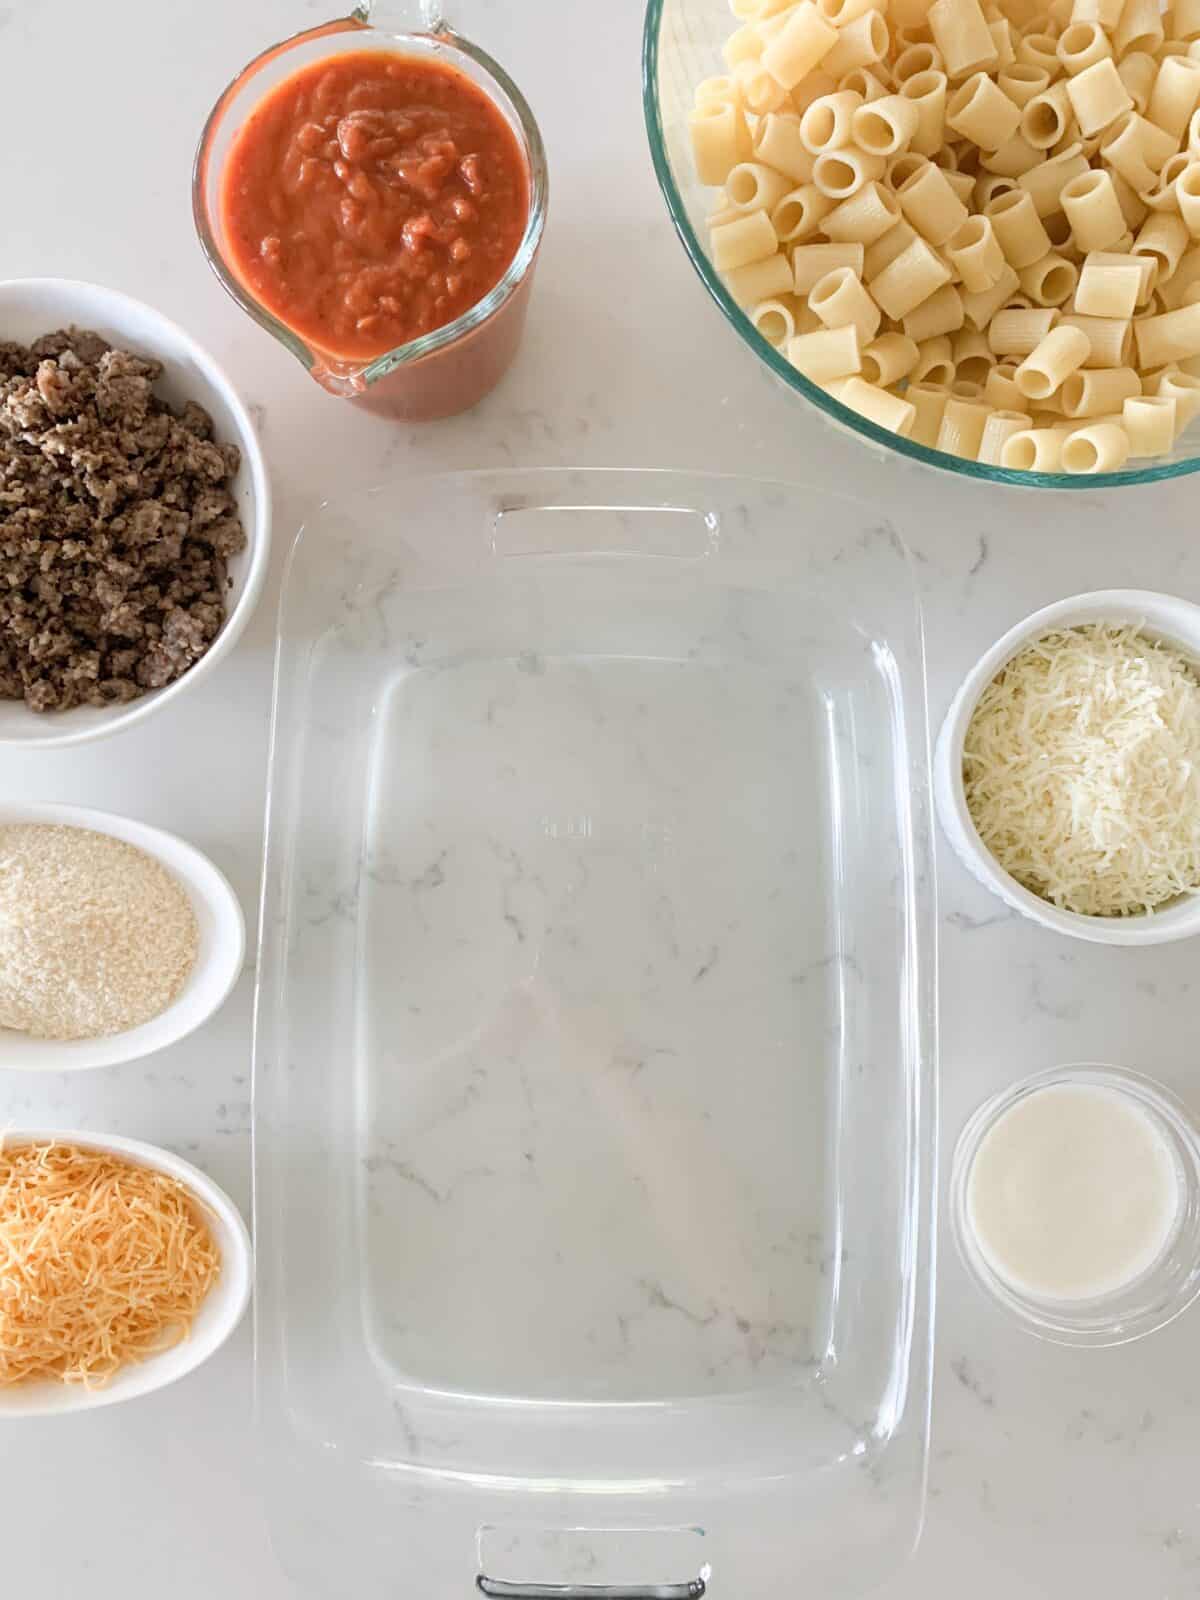 cheese rigatoni ingredients on counter top